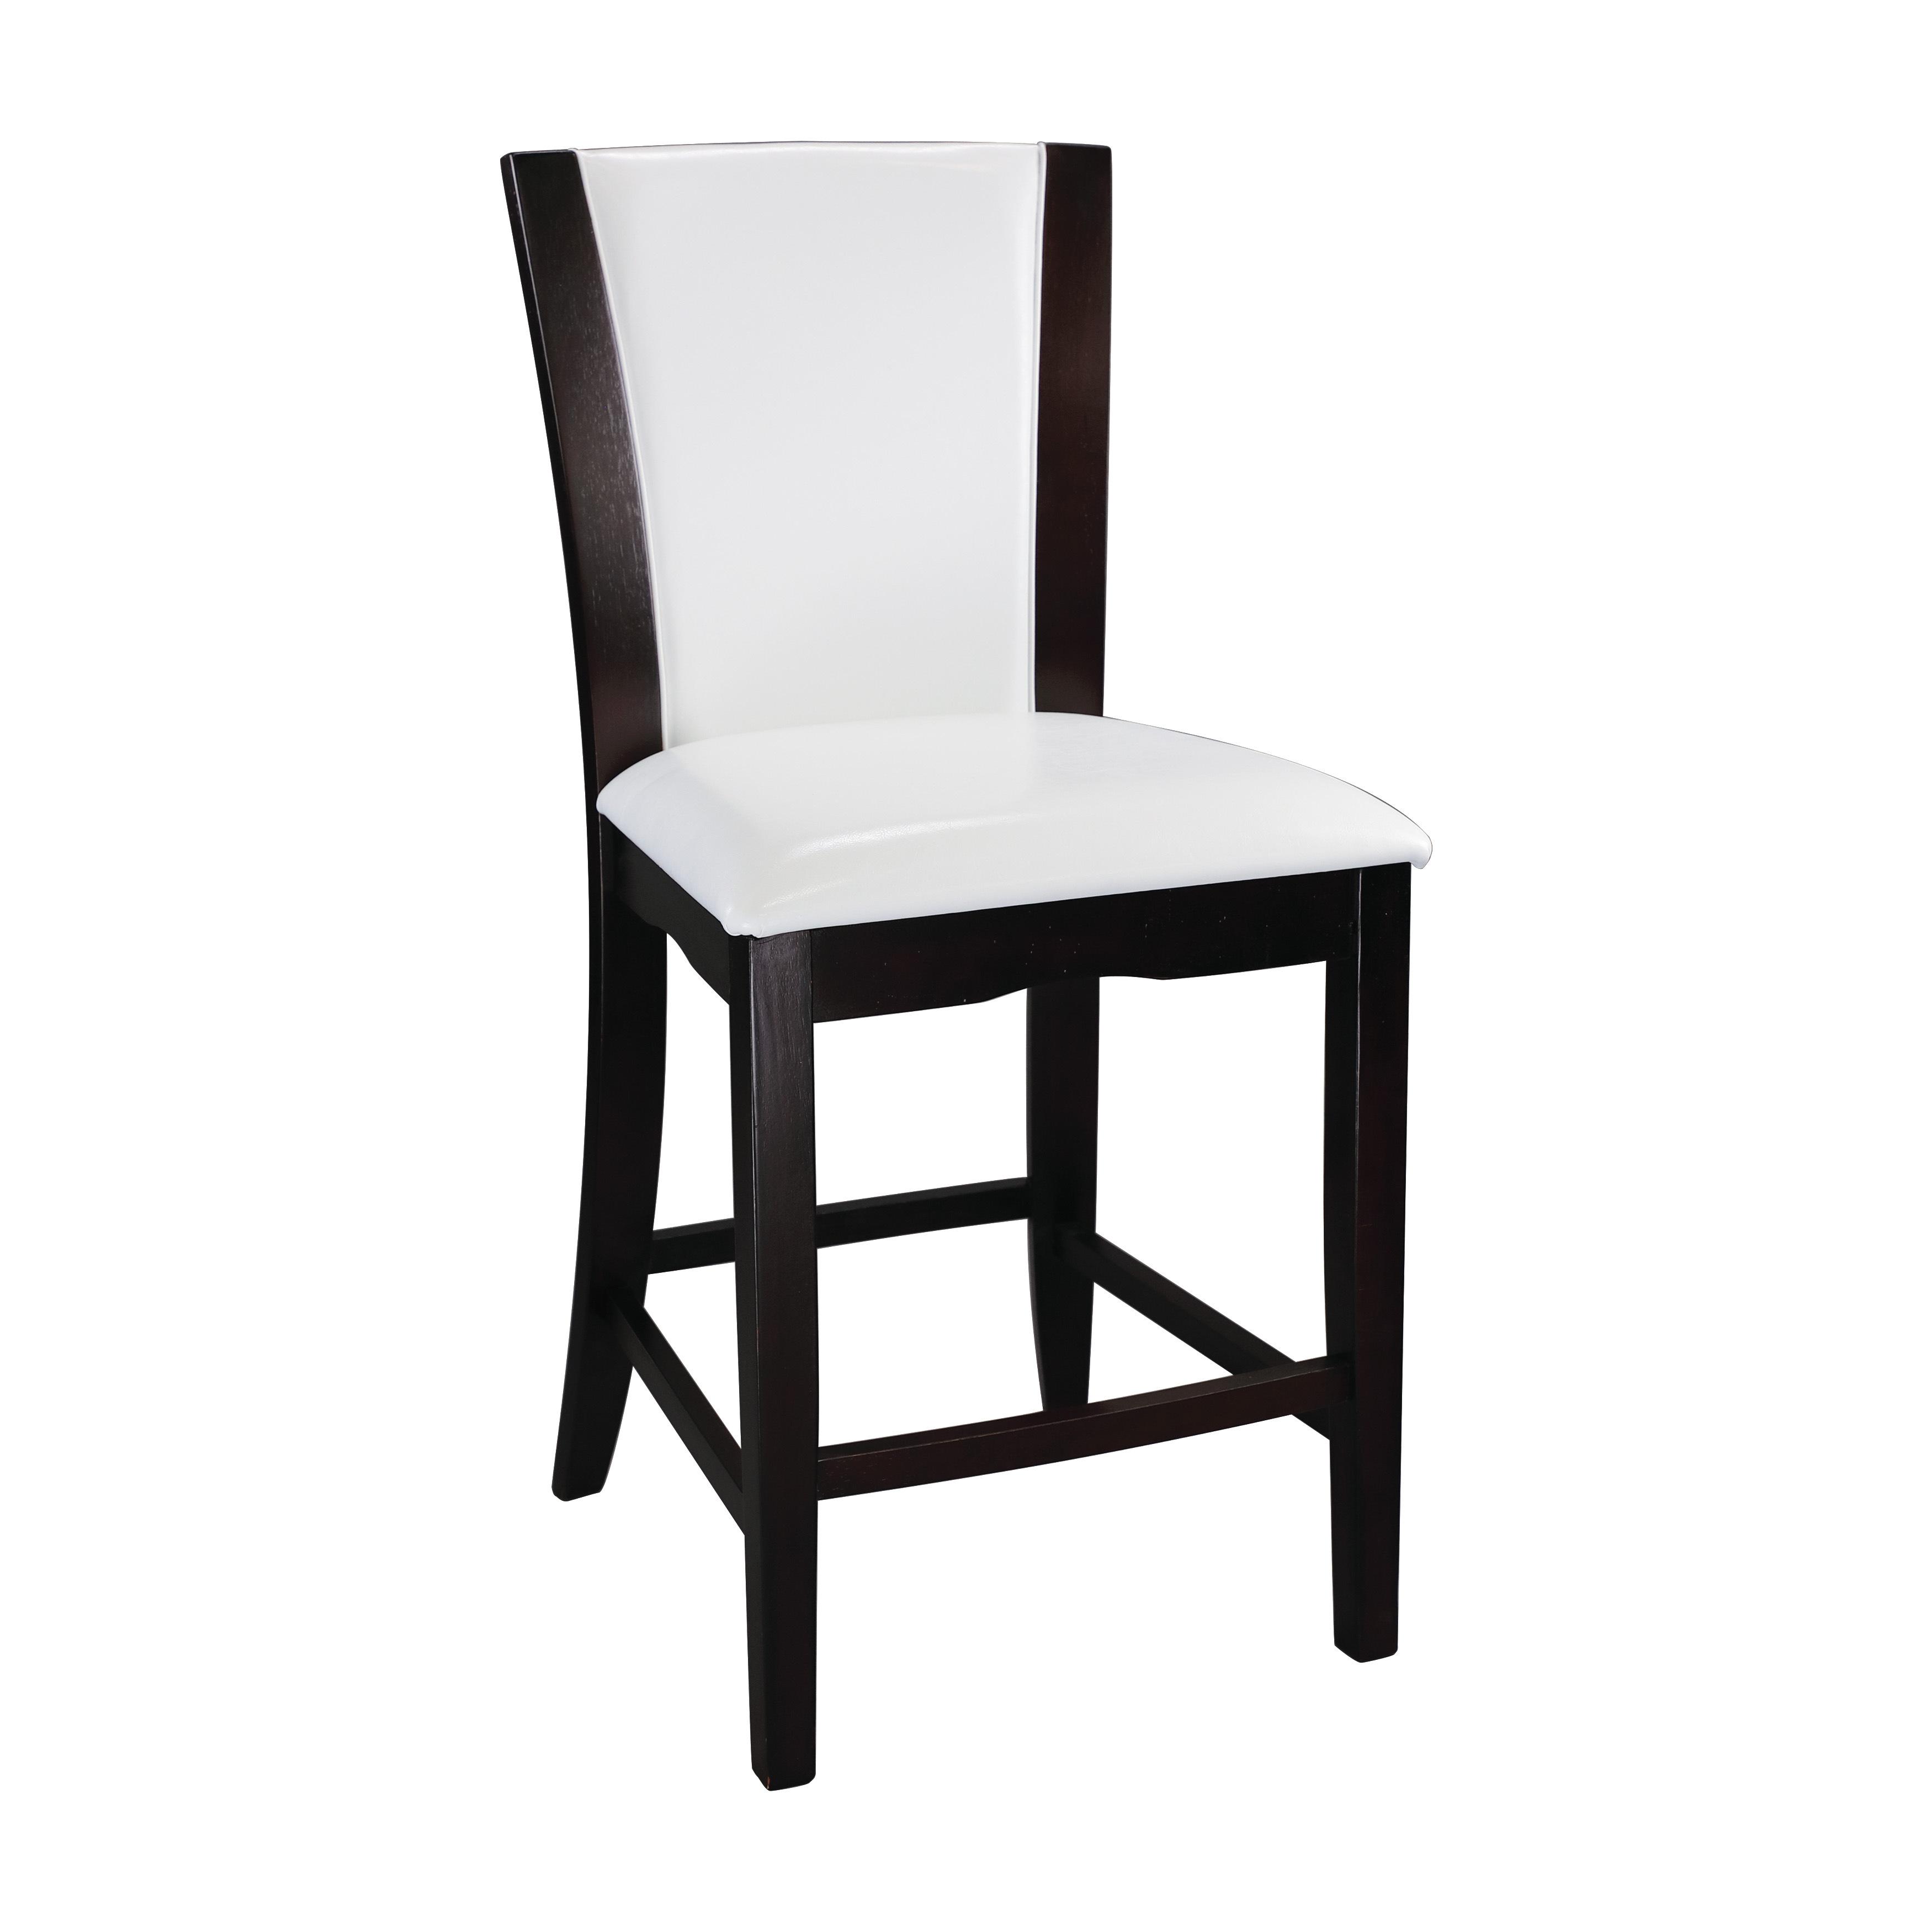 Homelegance 710-24W Daisy Counter Height Chair